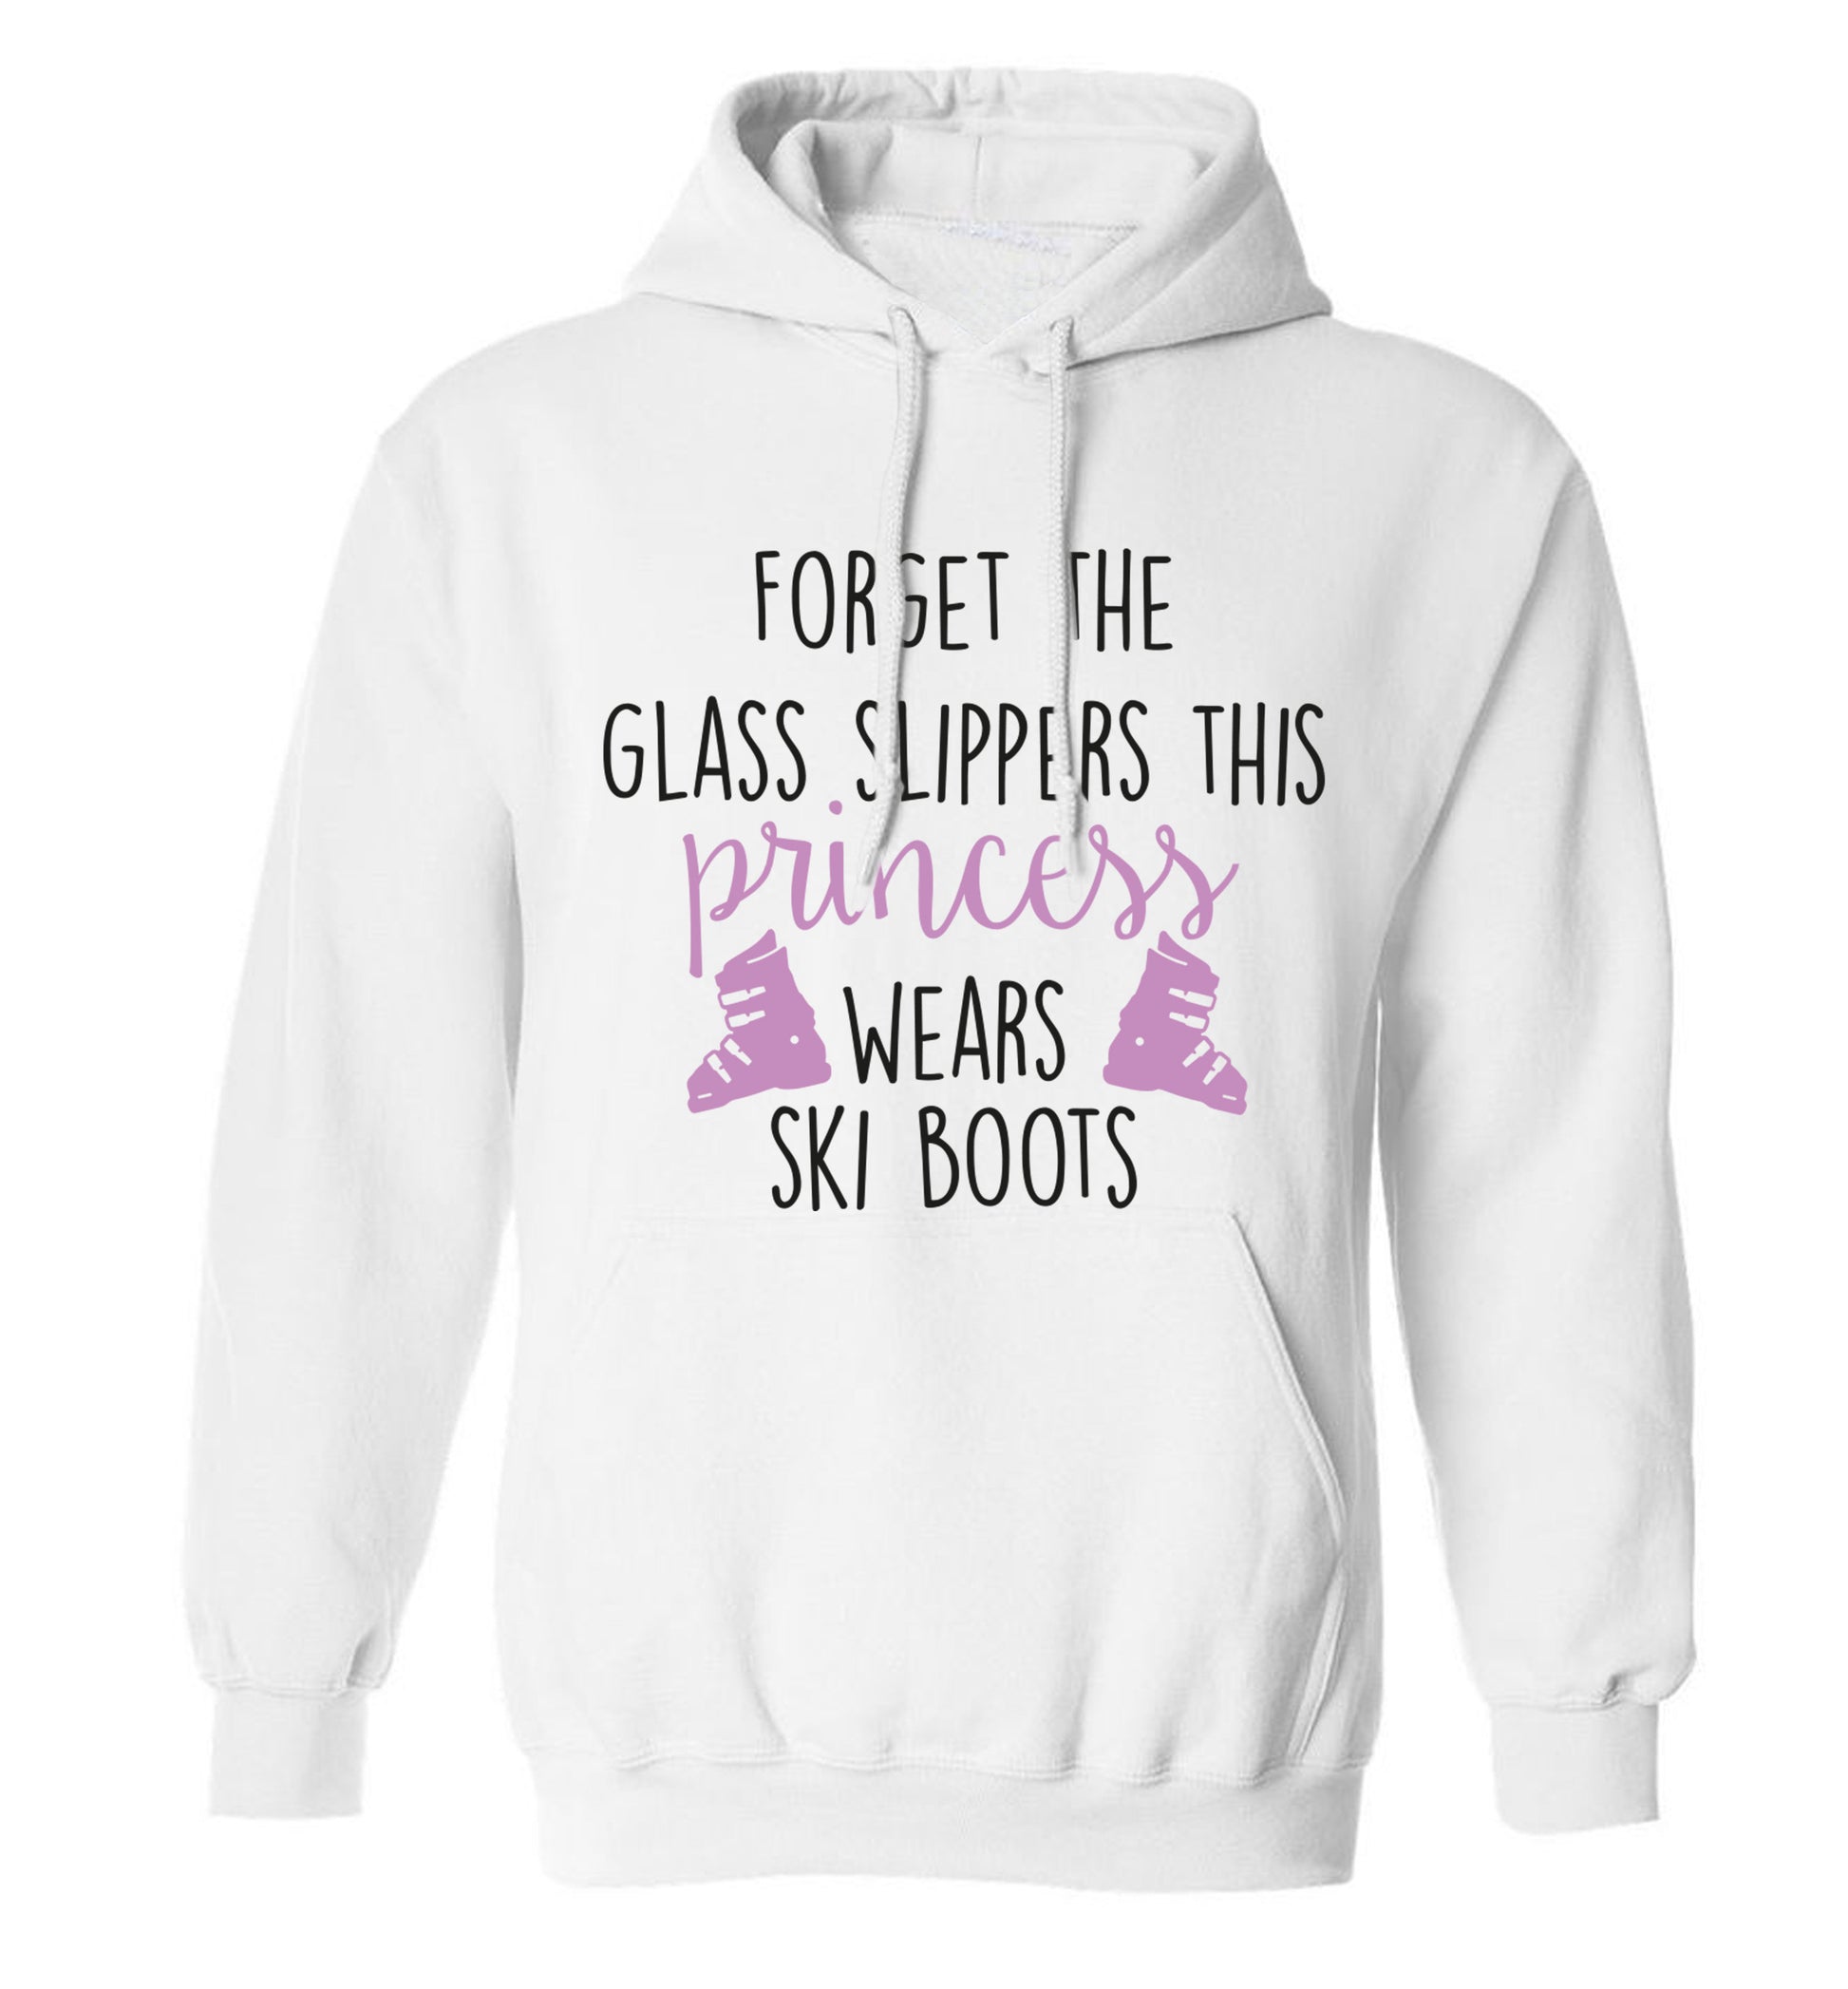 Forget the glass slippers this princess wears ski boots adults unisex white hoodie 2XL